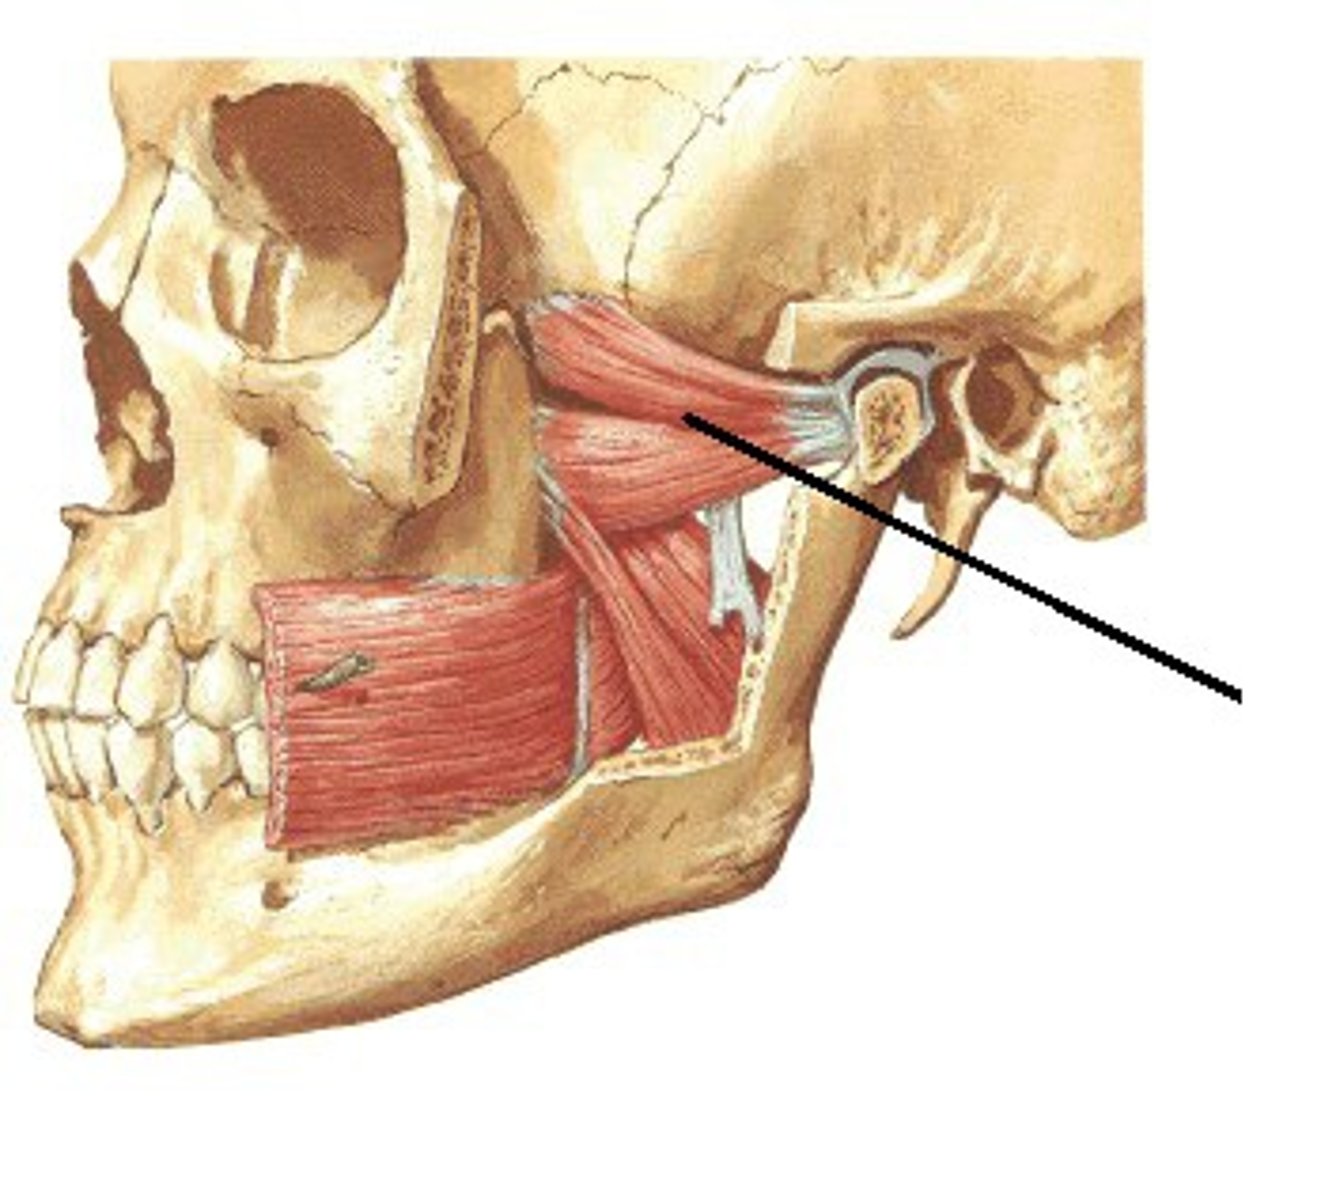 <p>Both heads: pterygoid fovea of mandible below condyloid process of mandible and intra-articular cartilage (articular disk) of TMJ </p>